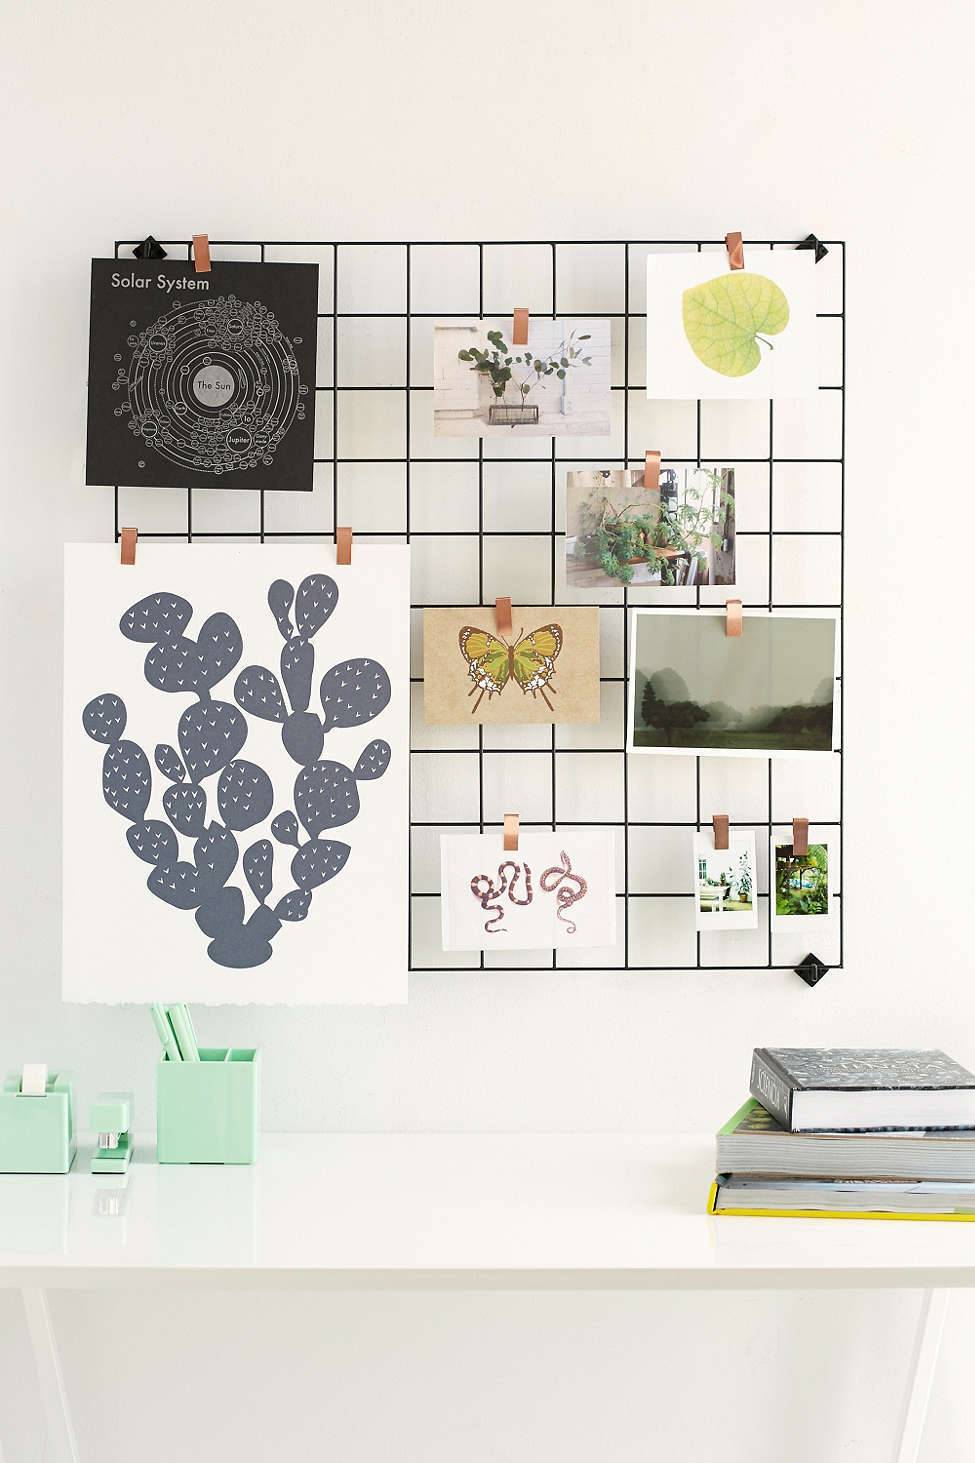 A wire rack to spend it on a wall acts like a bulletin board with various pieces of art on it.